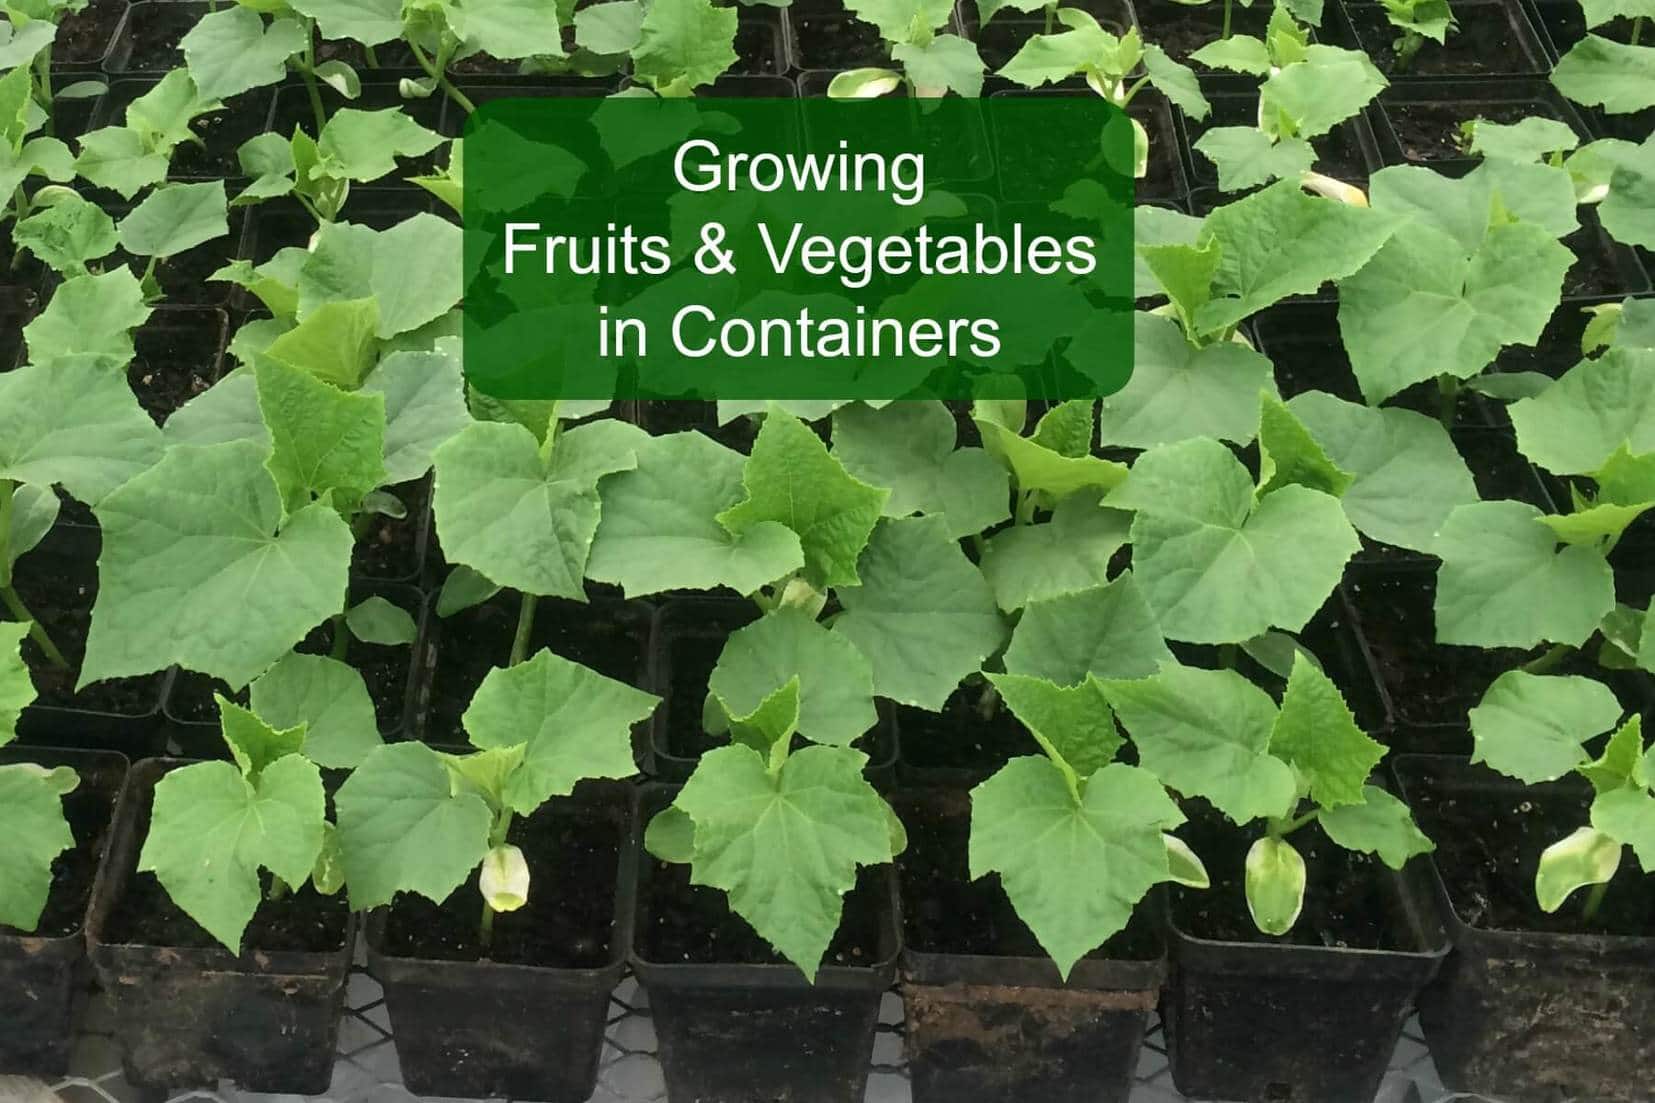 How to grow fruits and vegetables in containers